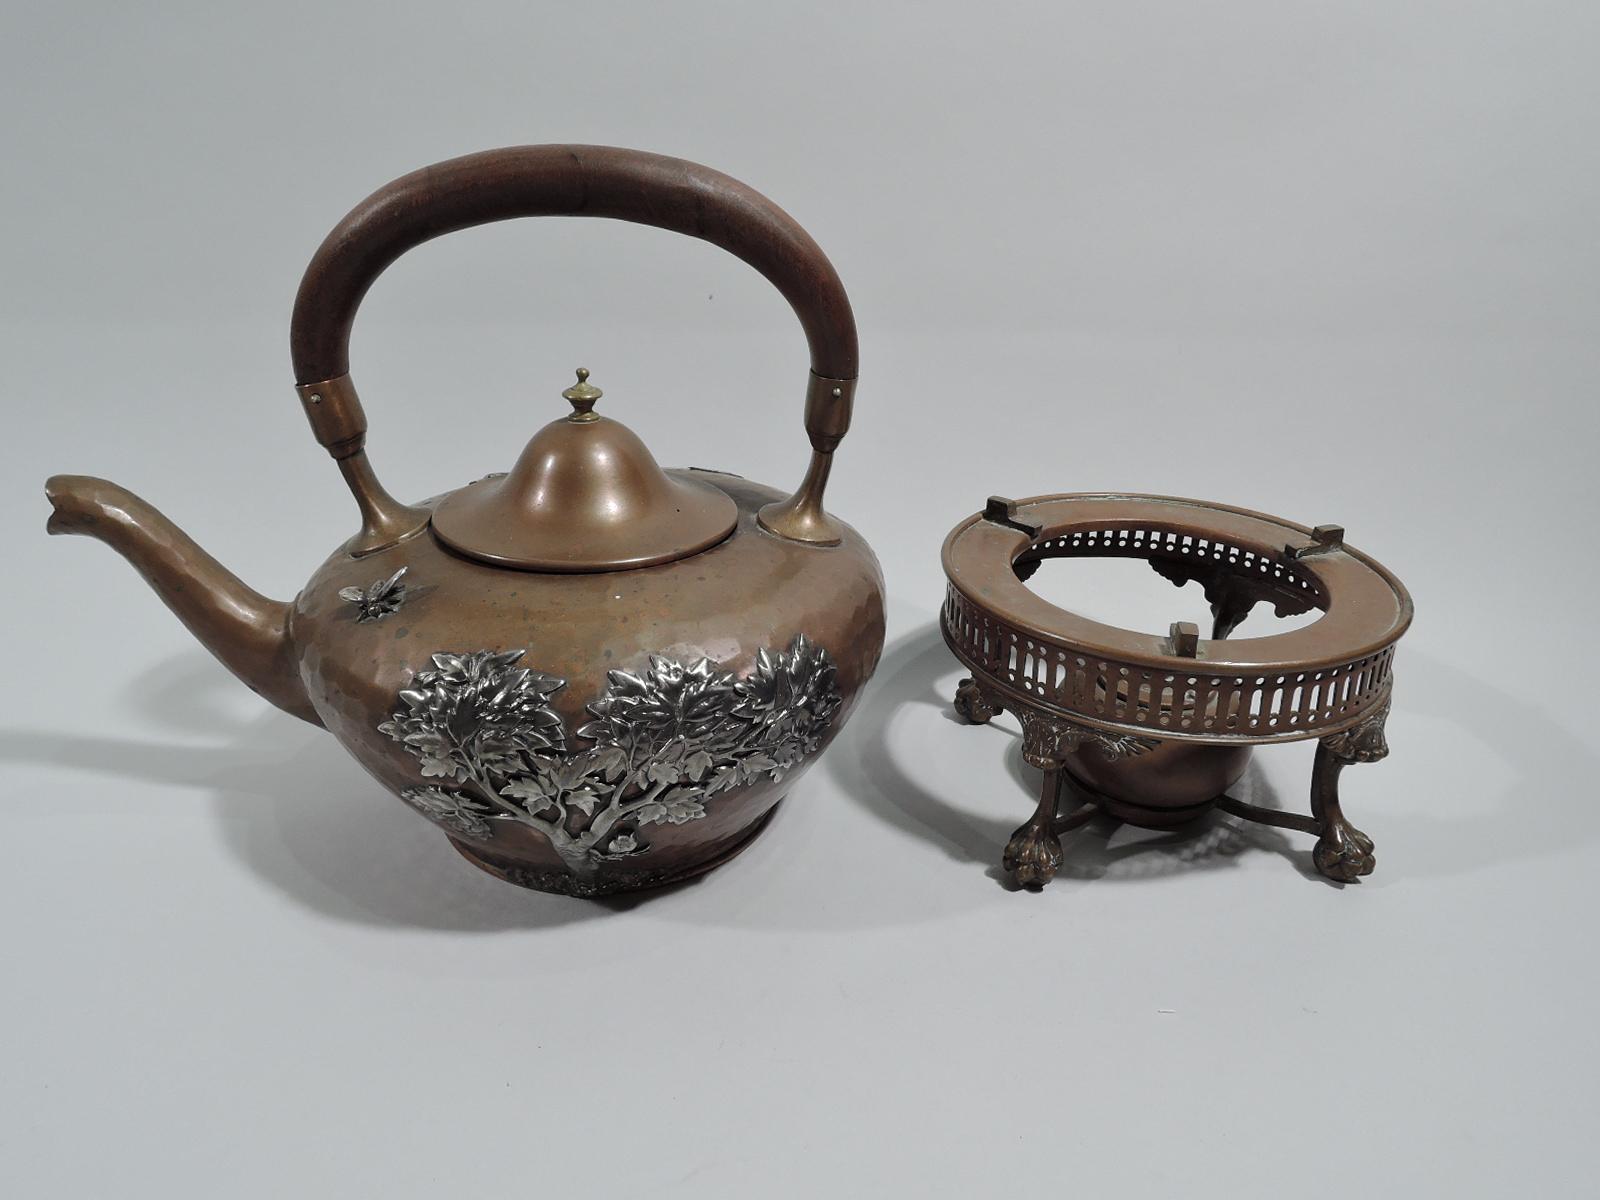 Japonesque mixed metal kettle on stand. Made by Gorham in Providence, ca 1880. Kettle: Round and tapering body with s-scroll spout. Applied silver ornament on hand-hammered copper ground. On one side a rooster clucks and pecks on granulated soil; on